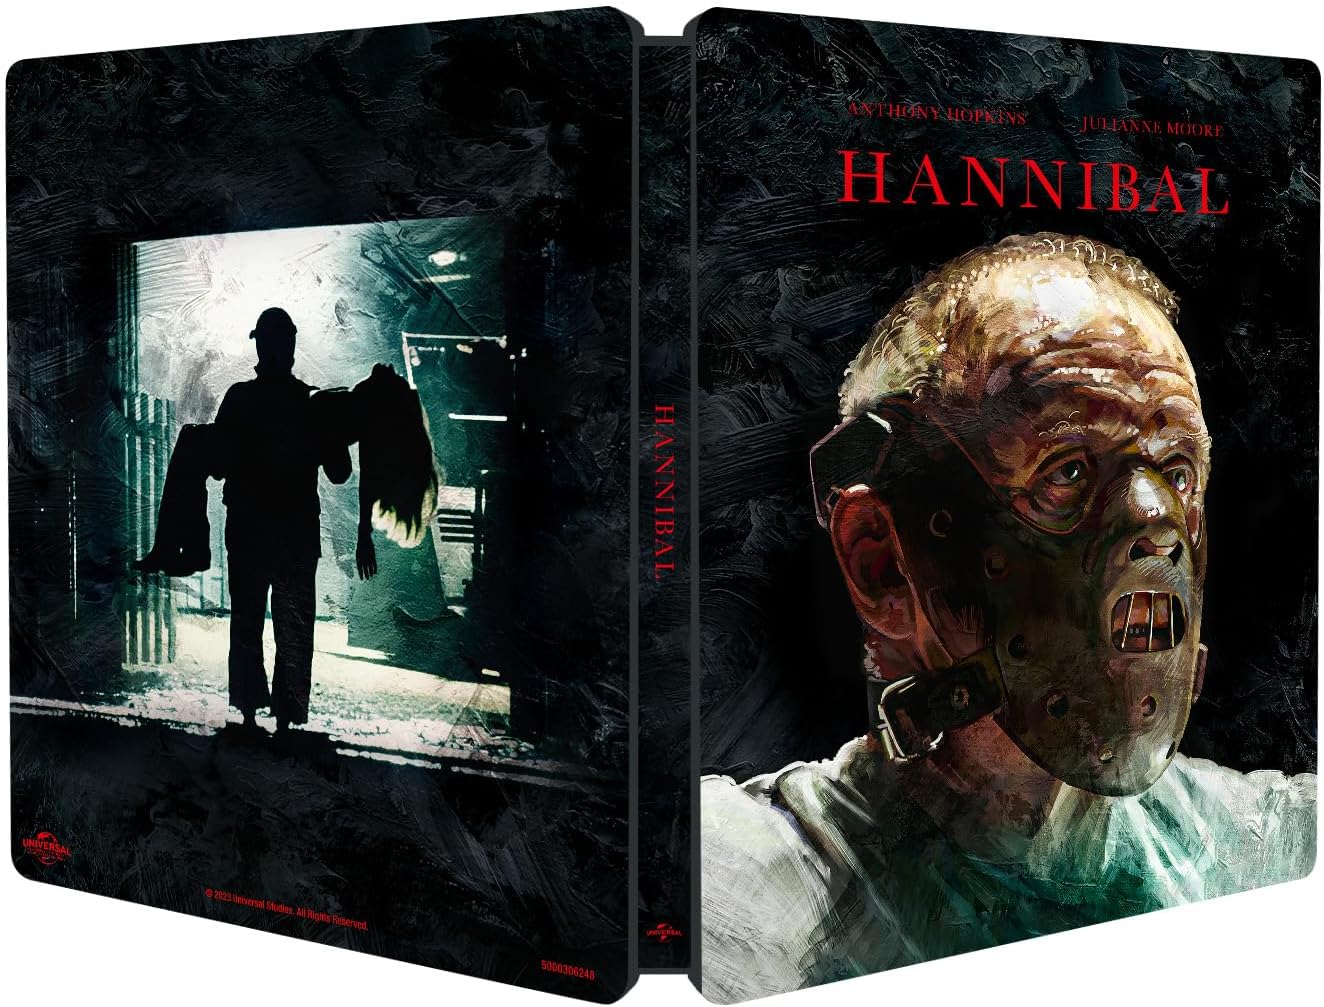 Hannibal Limited Edition Universal Pictures 4K UHD/Blu-Ray Steelbook [NEW] [SLIPCOVER]